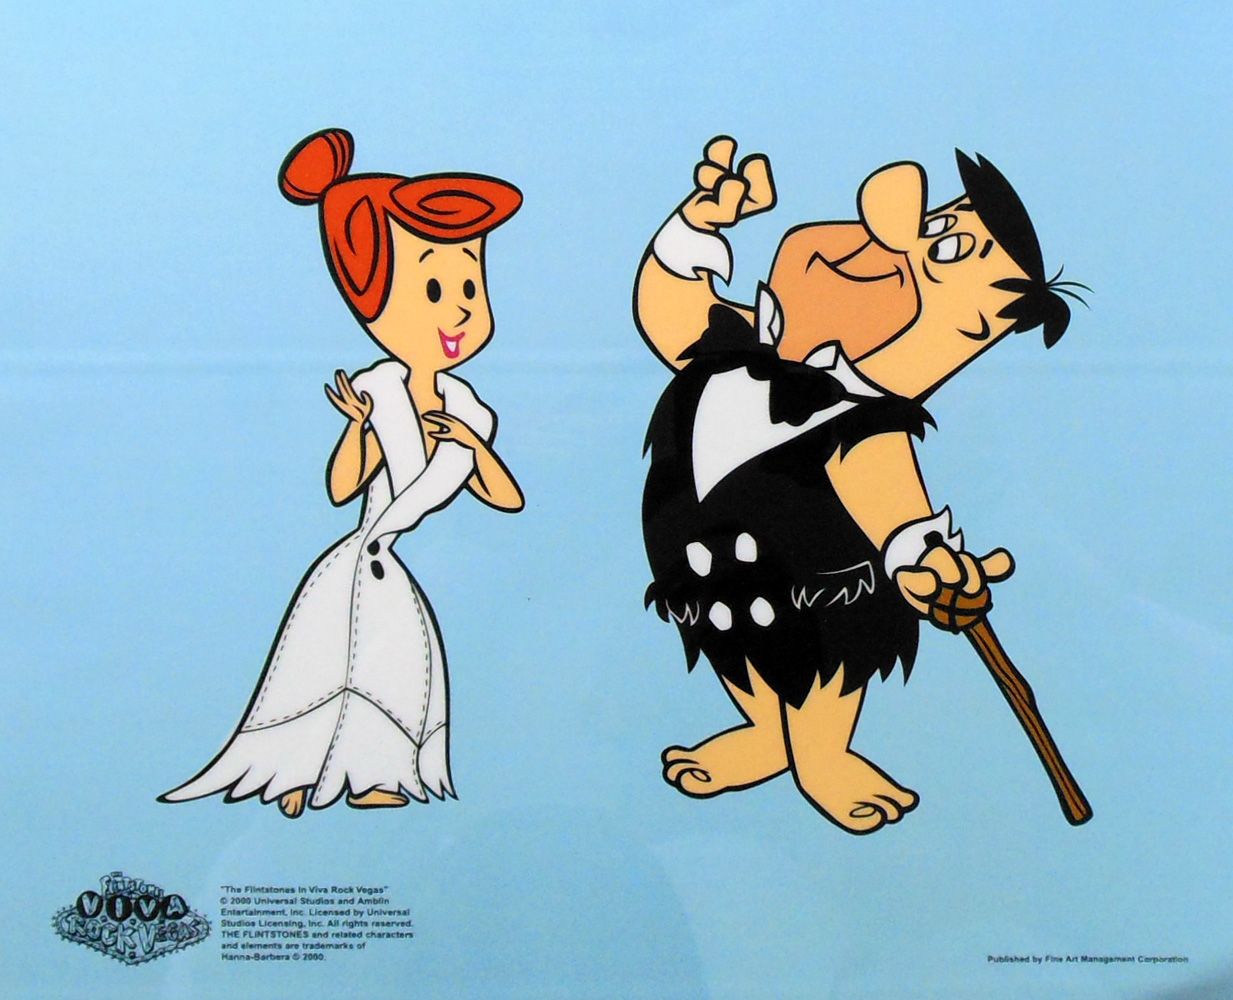 alastair glass add images of fred and wilma flintstone photo